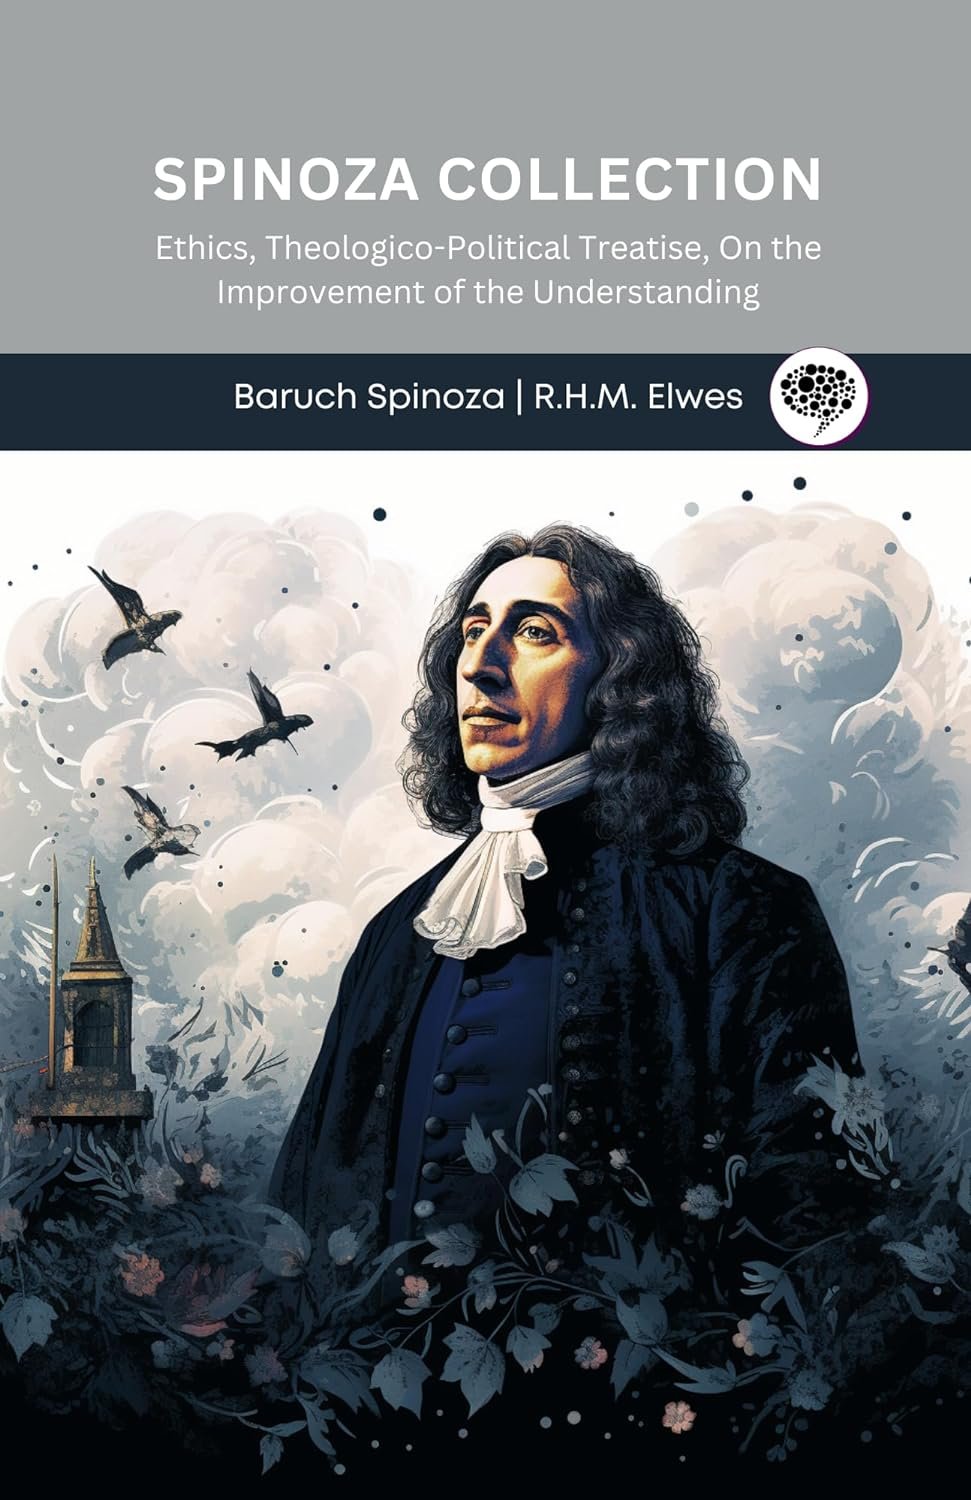 Spinoza Collection: Ethics, Theologico-Political Treatise, On the Improvement of the Understanding